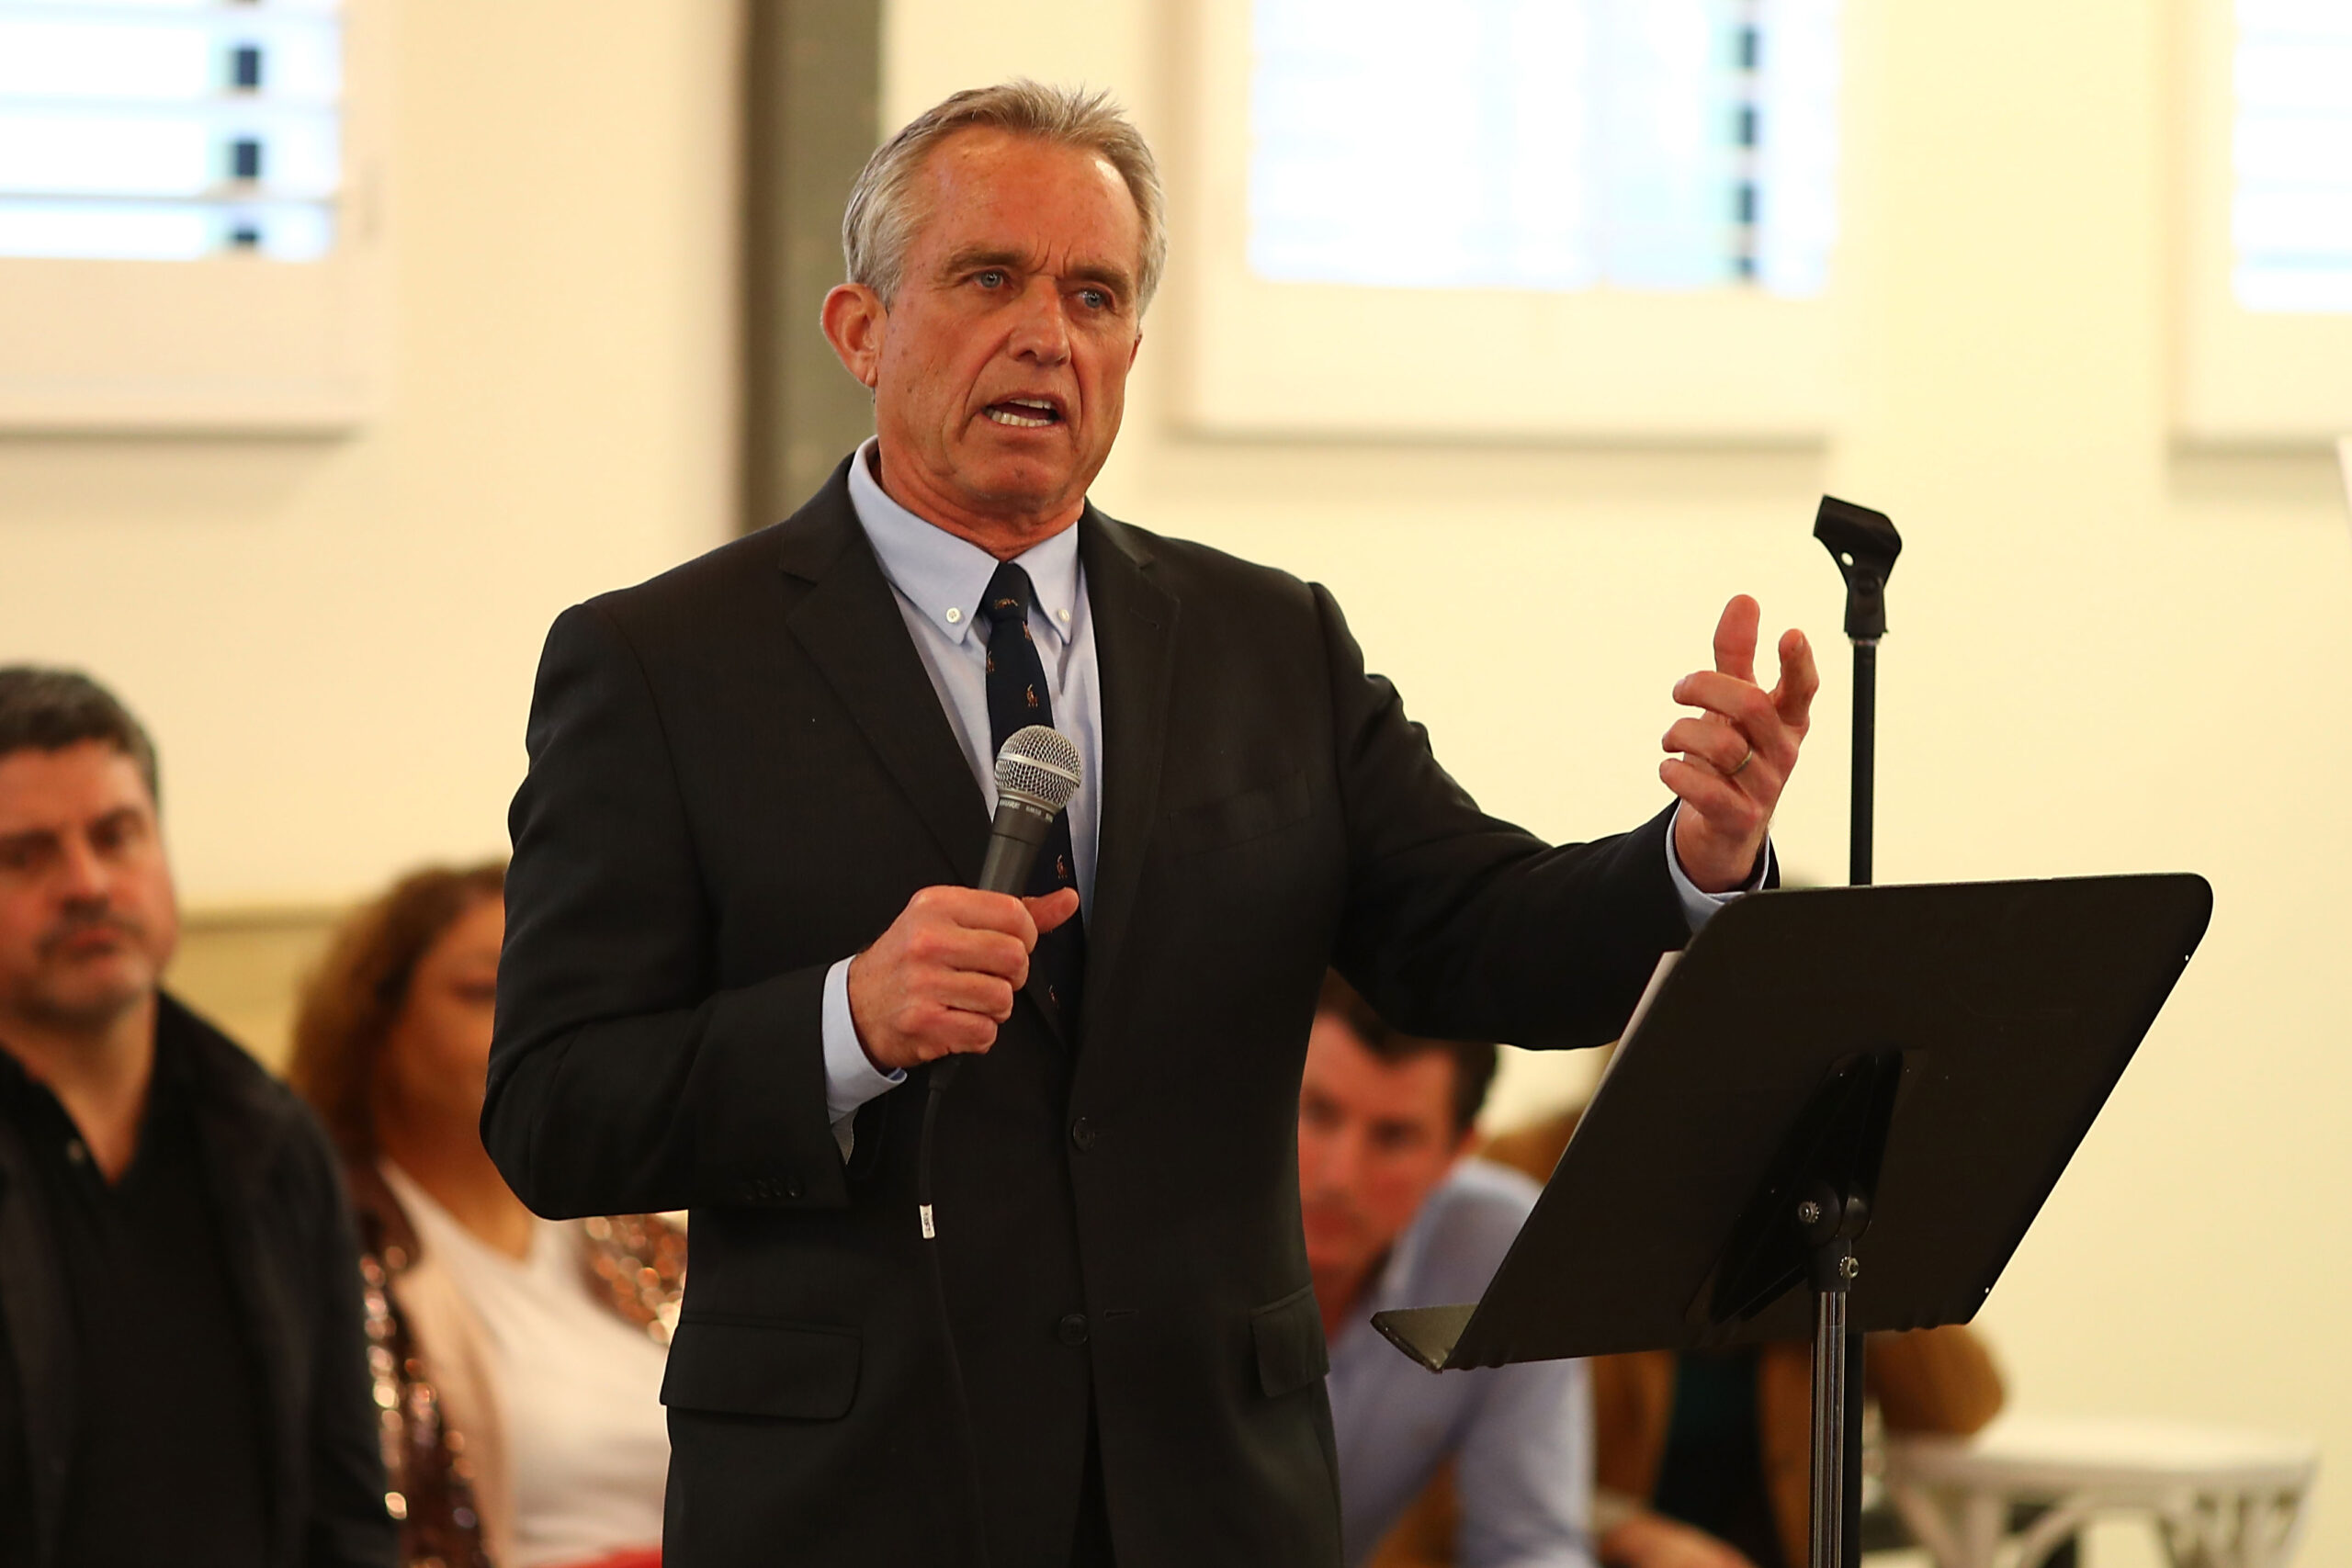 Anti-Vaxxer RFK Jr. Busted for Holiday Party Urging Vaccinations, Blames Wife Cheryl Hines